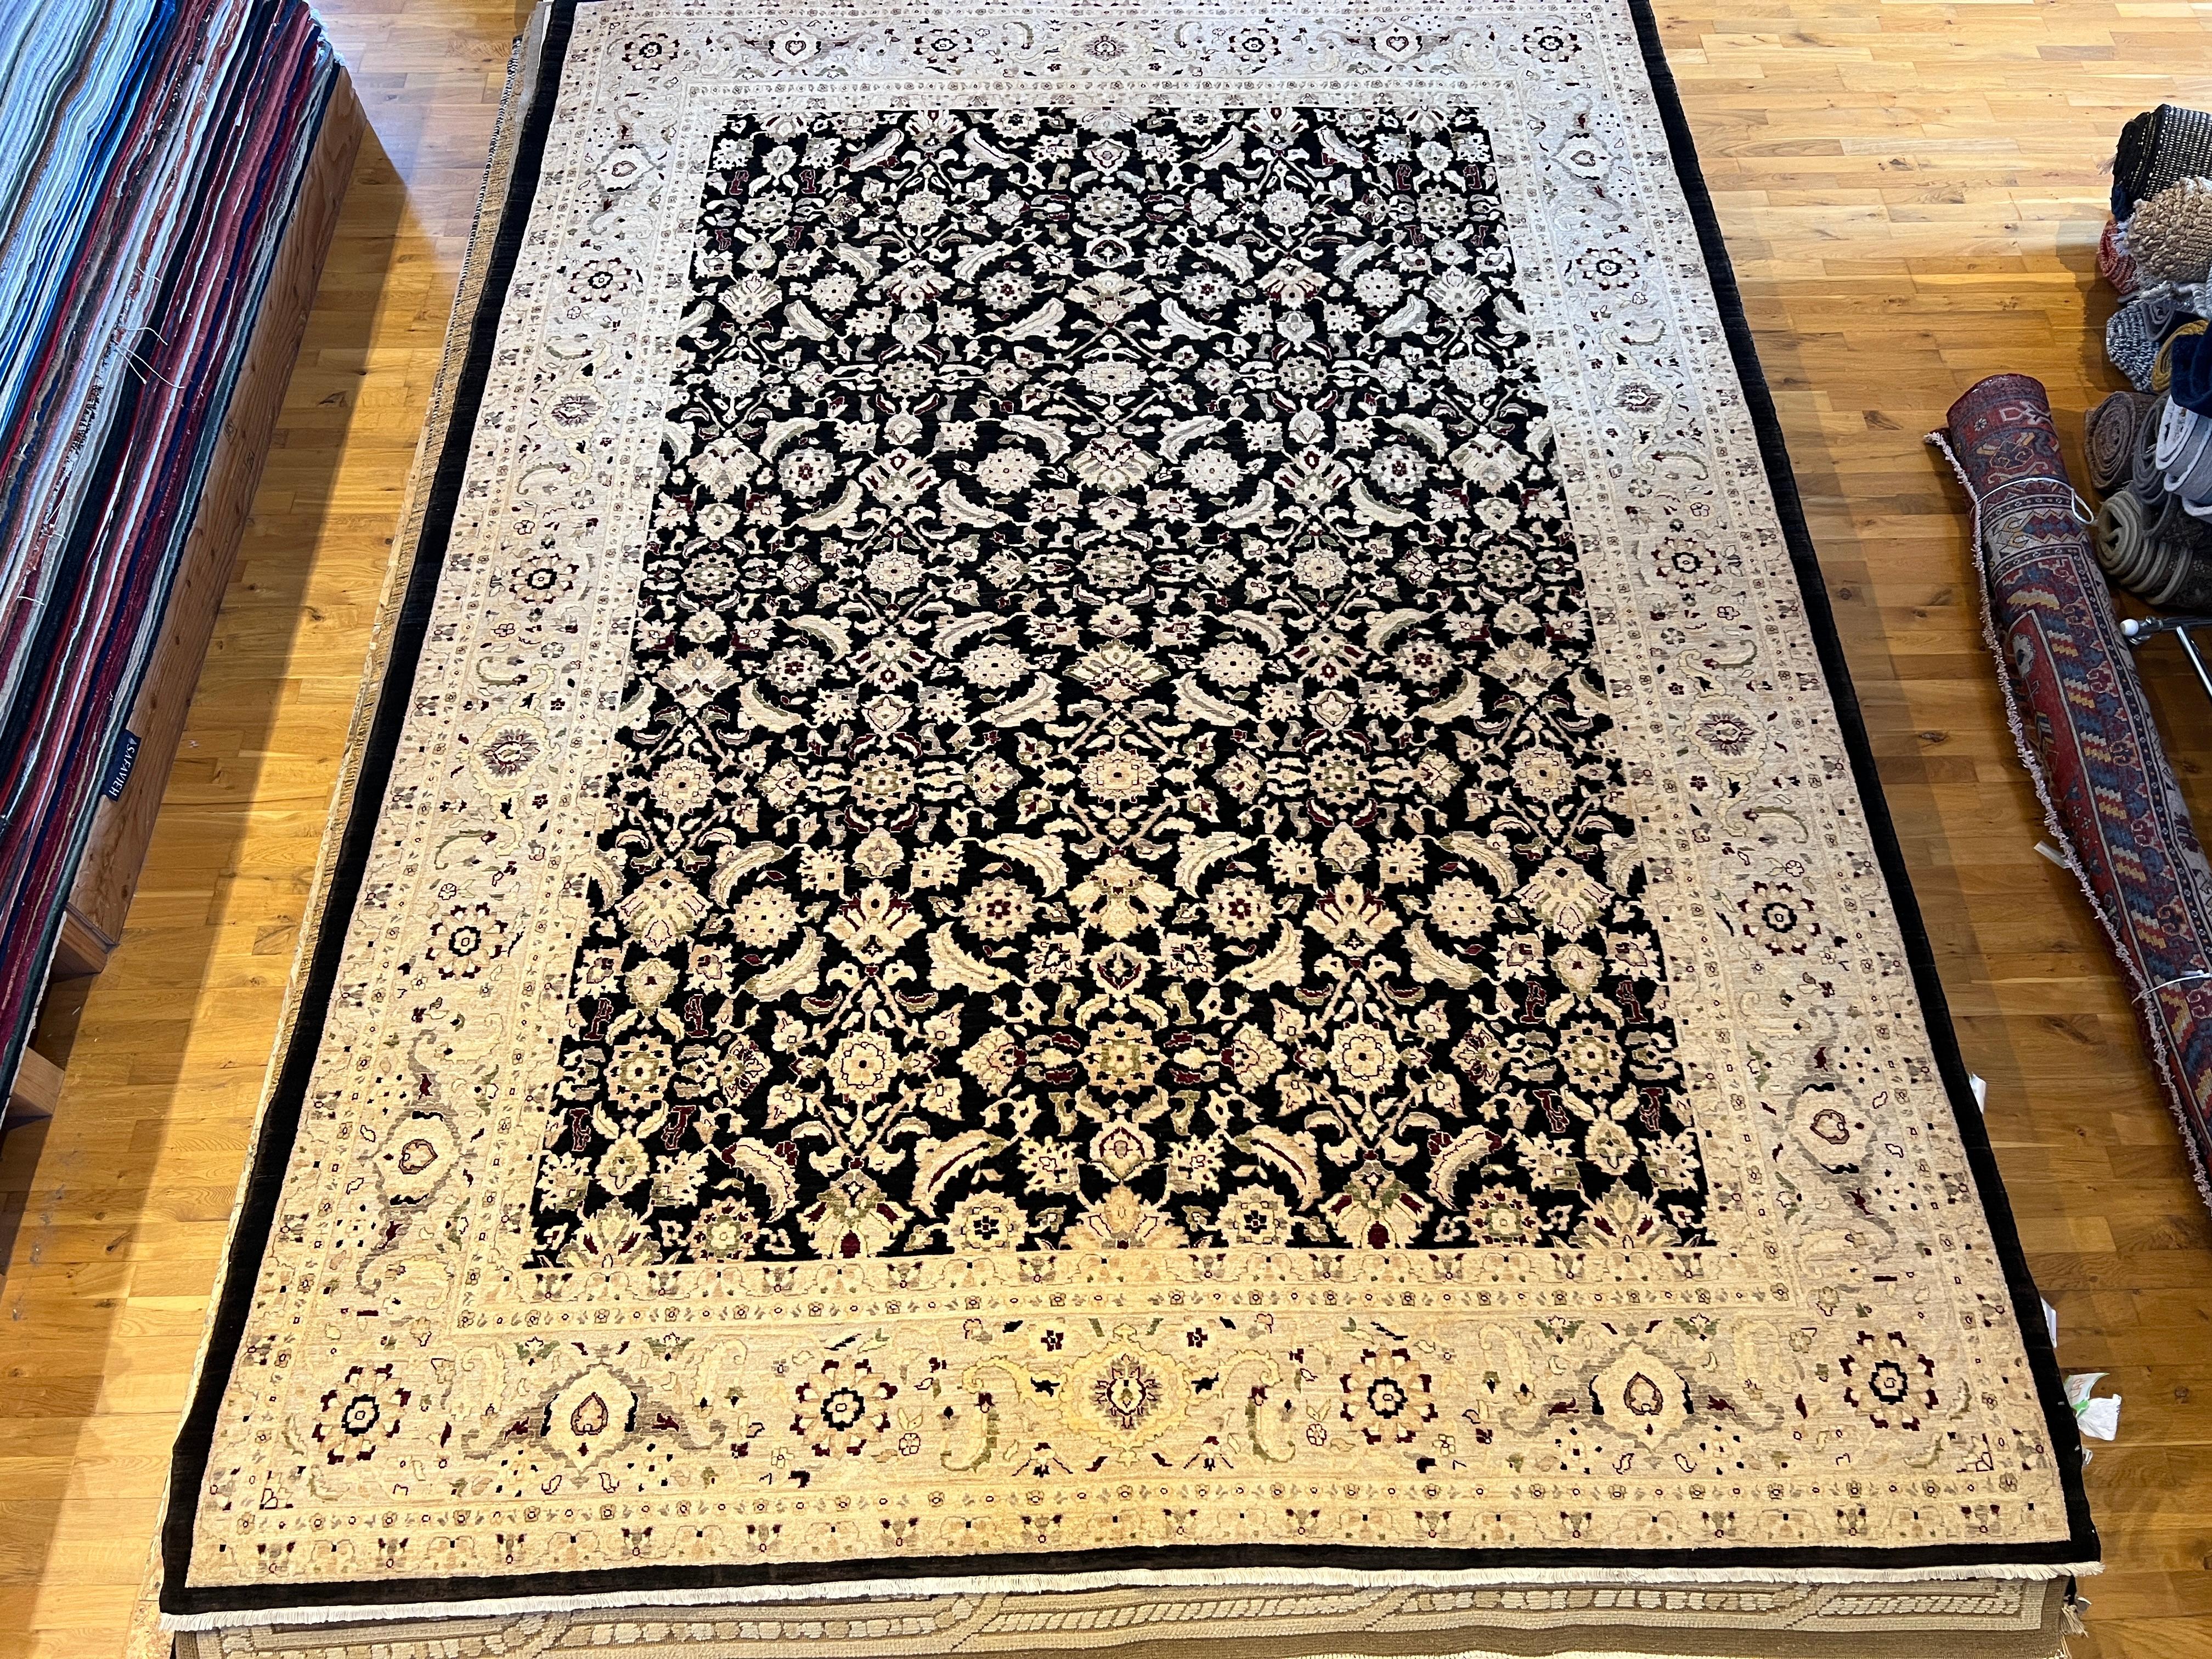 This expertly hand knotted 9'x12' rug features an intricate floral design in black and gold, perfect for adding a touch of elegance to any room. Made from high-quality wool and natural dyes, this rug is both beautiful and durable. Made in Pakistan